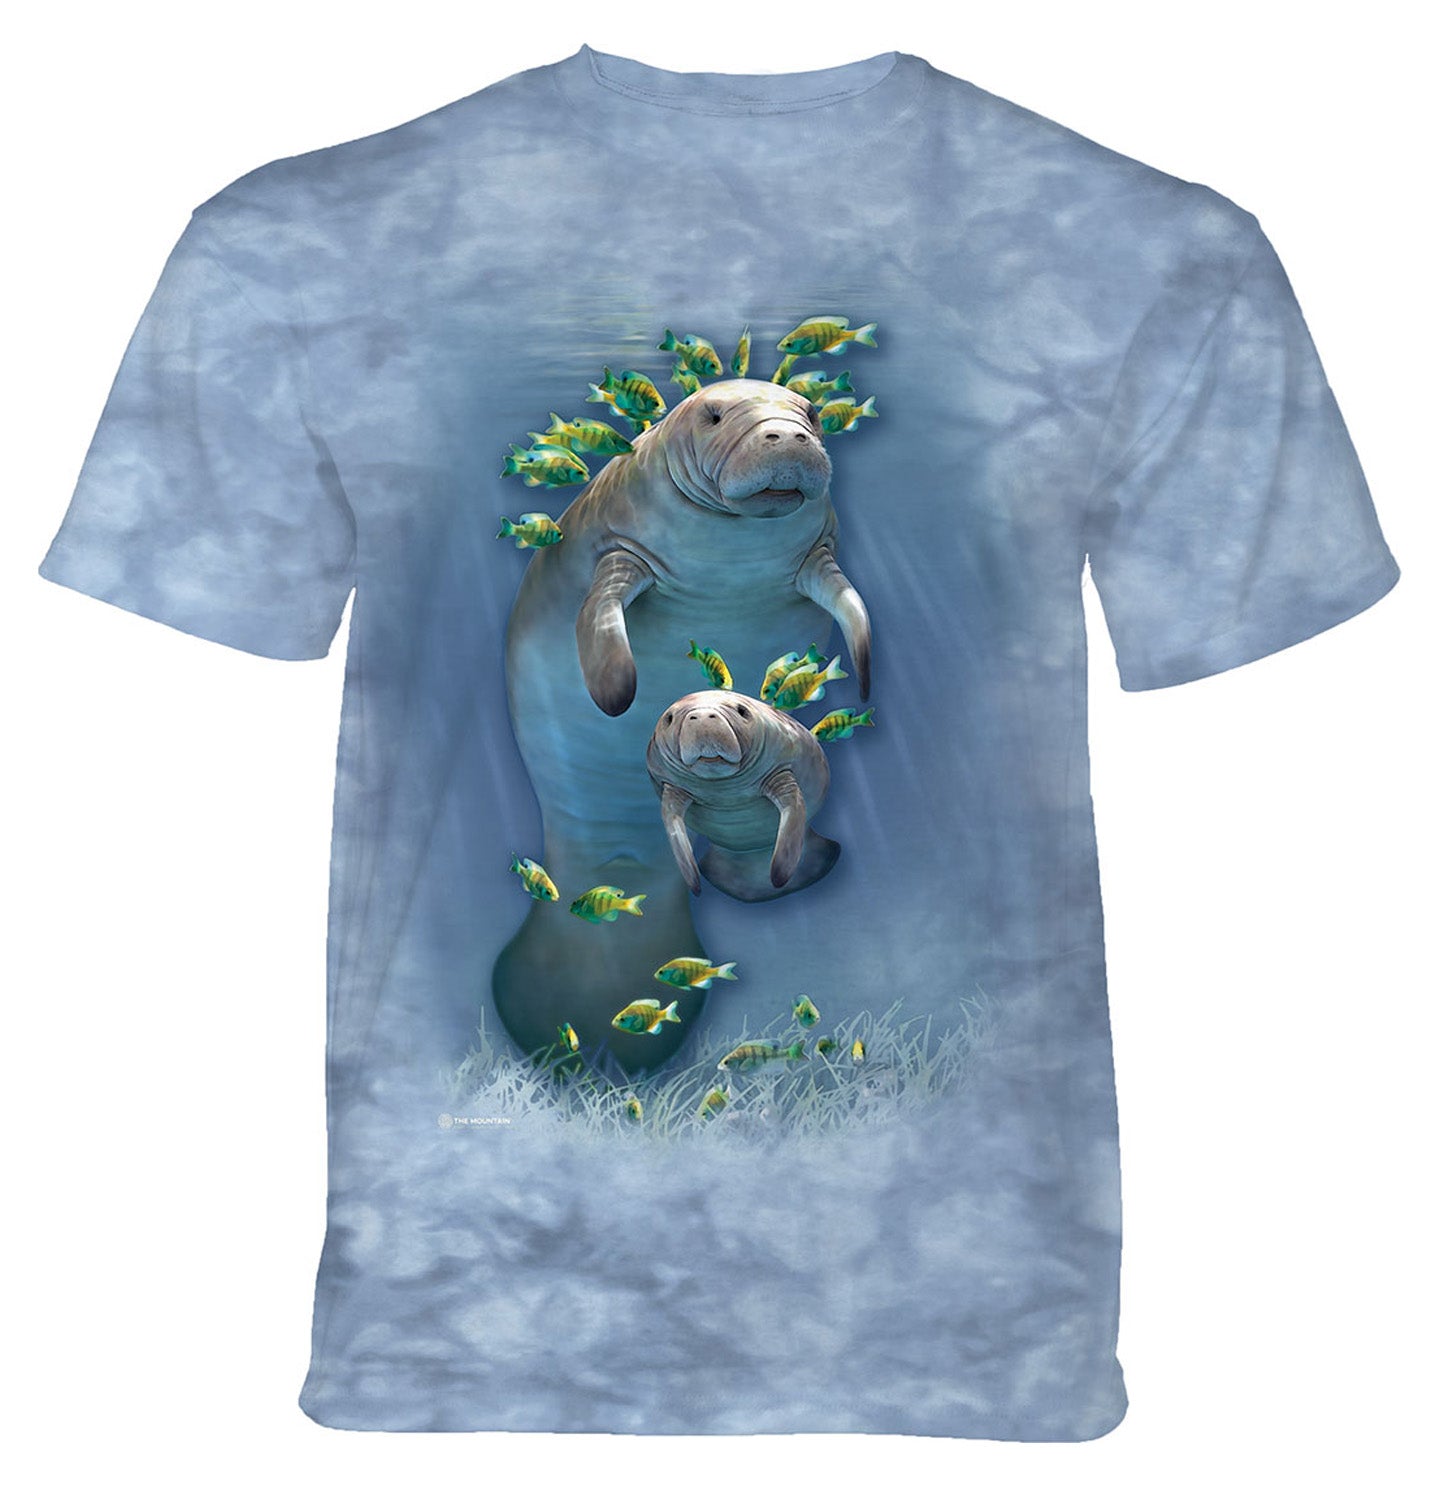 The Mountain - Sea Cow and Calf - Adult Unisex T-Shirt